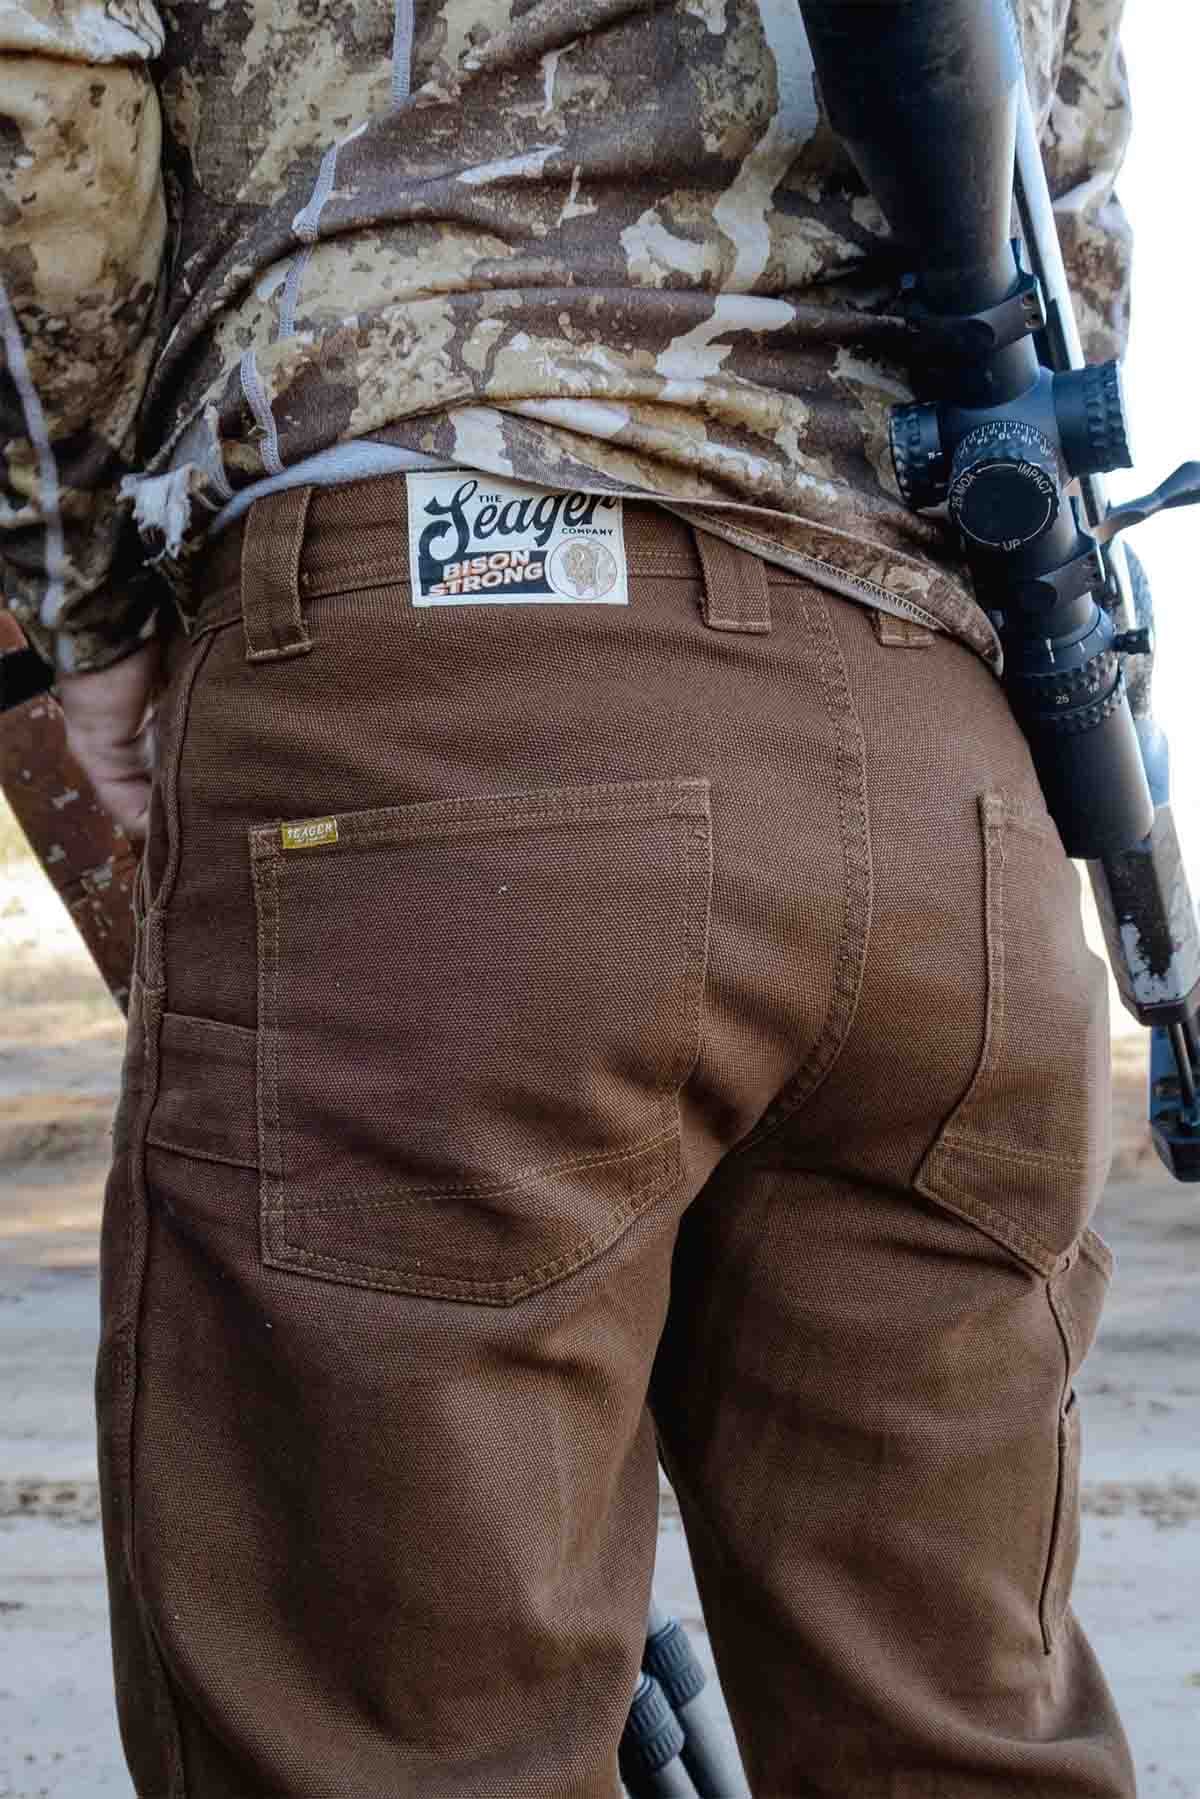 Seager - Bison Pant - Brown - Model